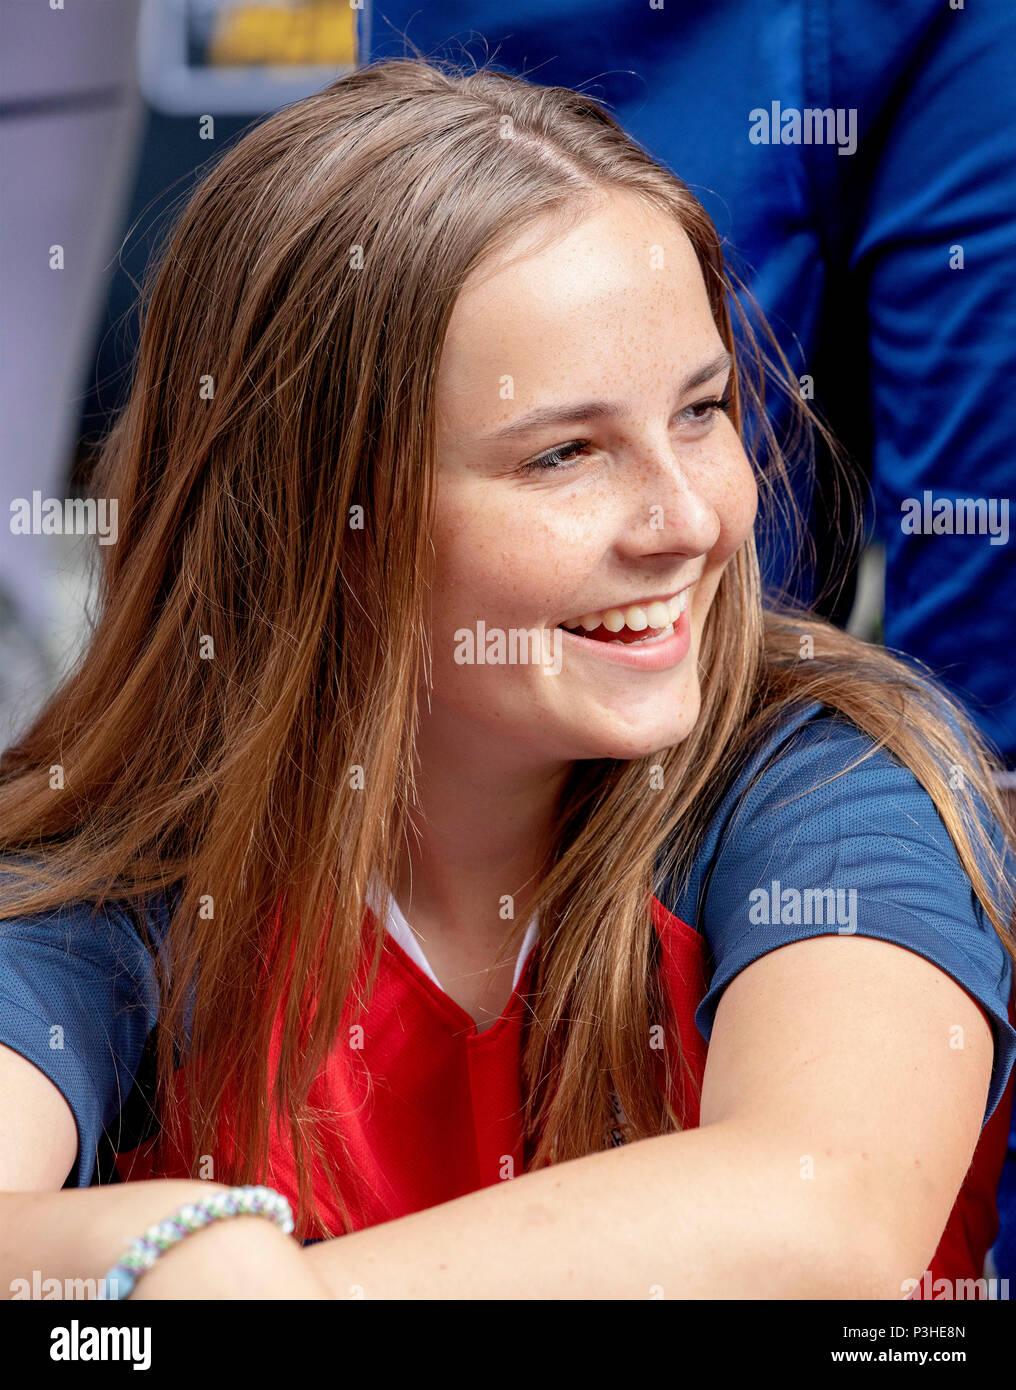 Skaugum, Norway. 18th June, 2018. Princess Ingrid Alexandra of Norway at the Skaugum stadium, on June 18, 2018, attending a friendship match in football between Team Skaugum and Nordstrand Allsport Photo : Albert Nieboer/Netherlands OUT/Point de Vue OUT -NO WIRE SERVICE- Credit: Albert Nieboer/Royal Press Europe/RPE/dpa/Alamy Live News Stock Photo